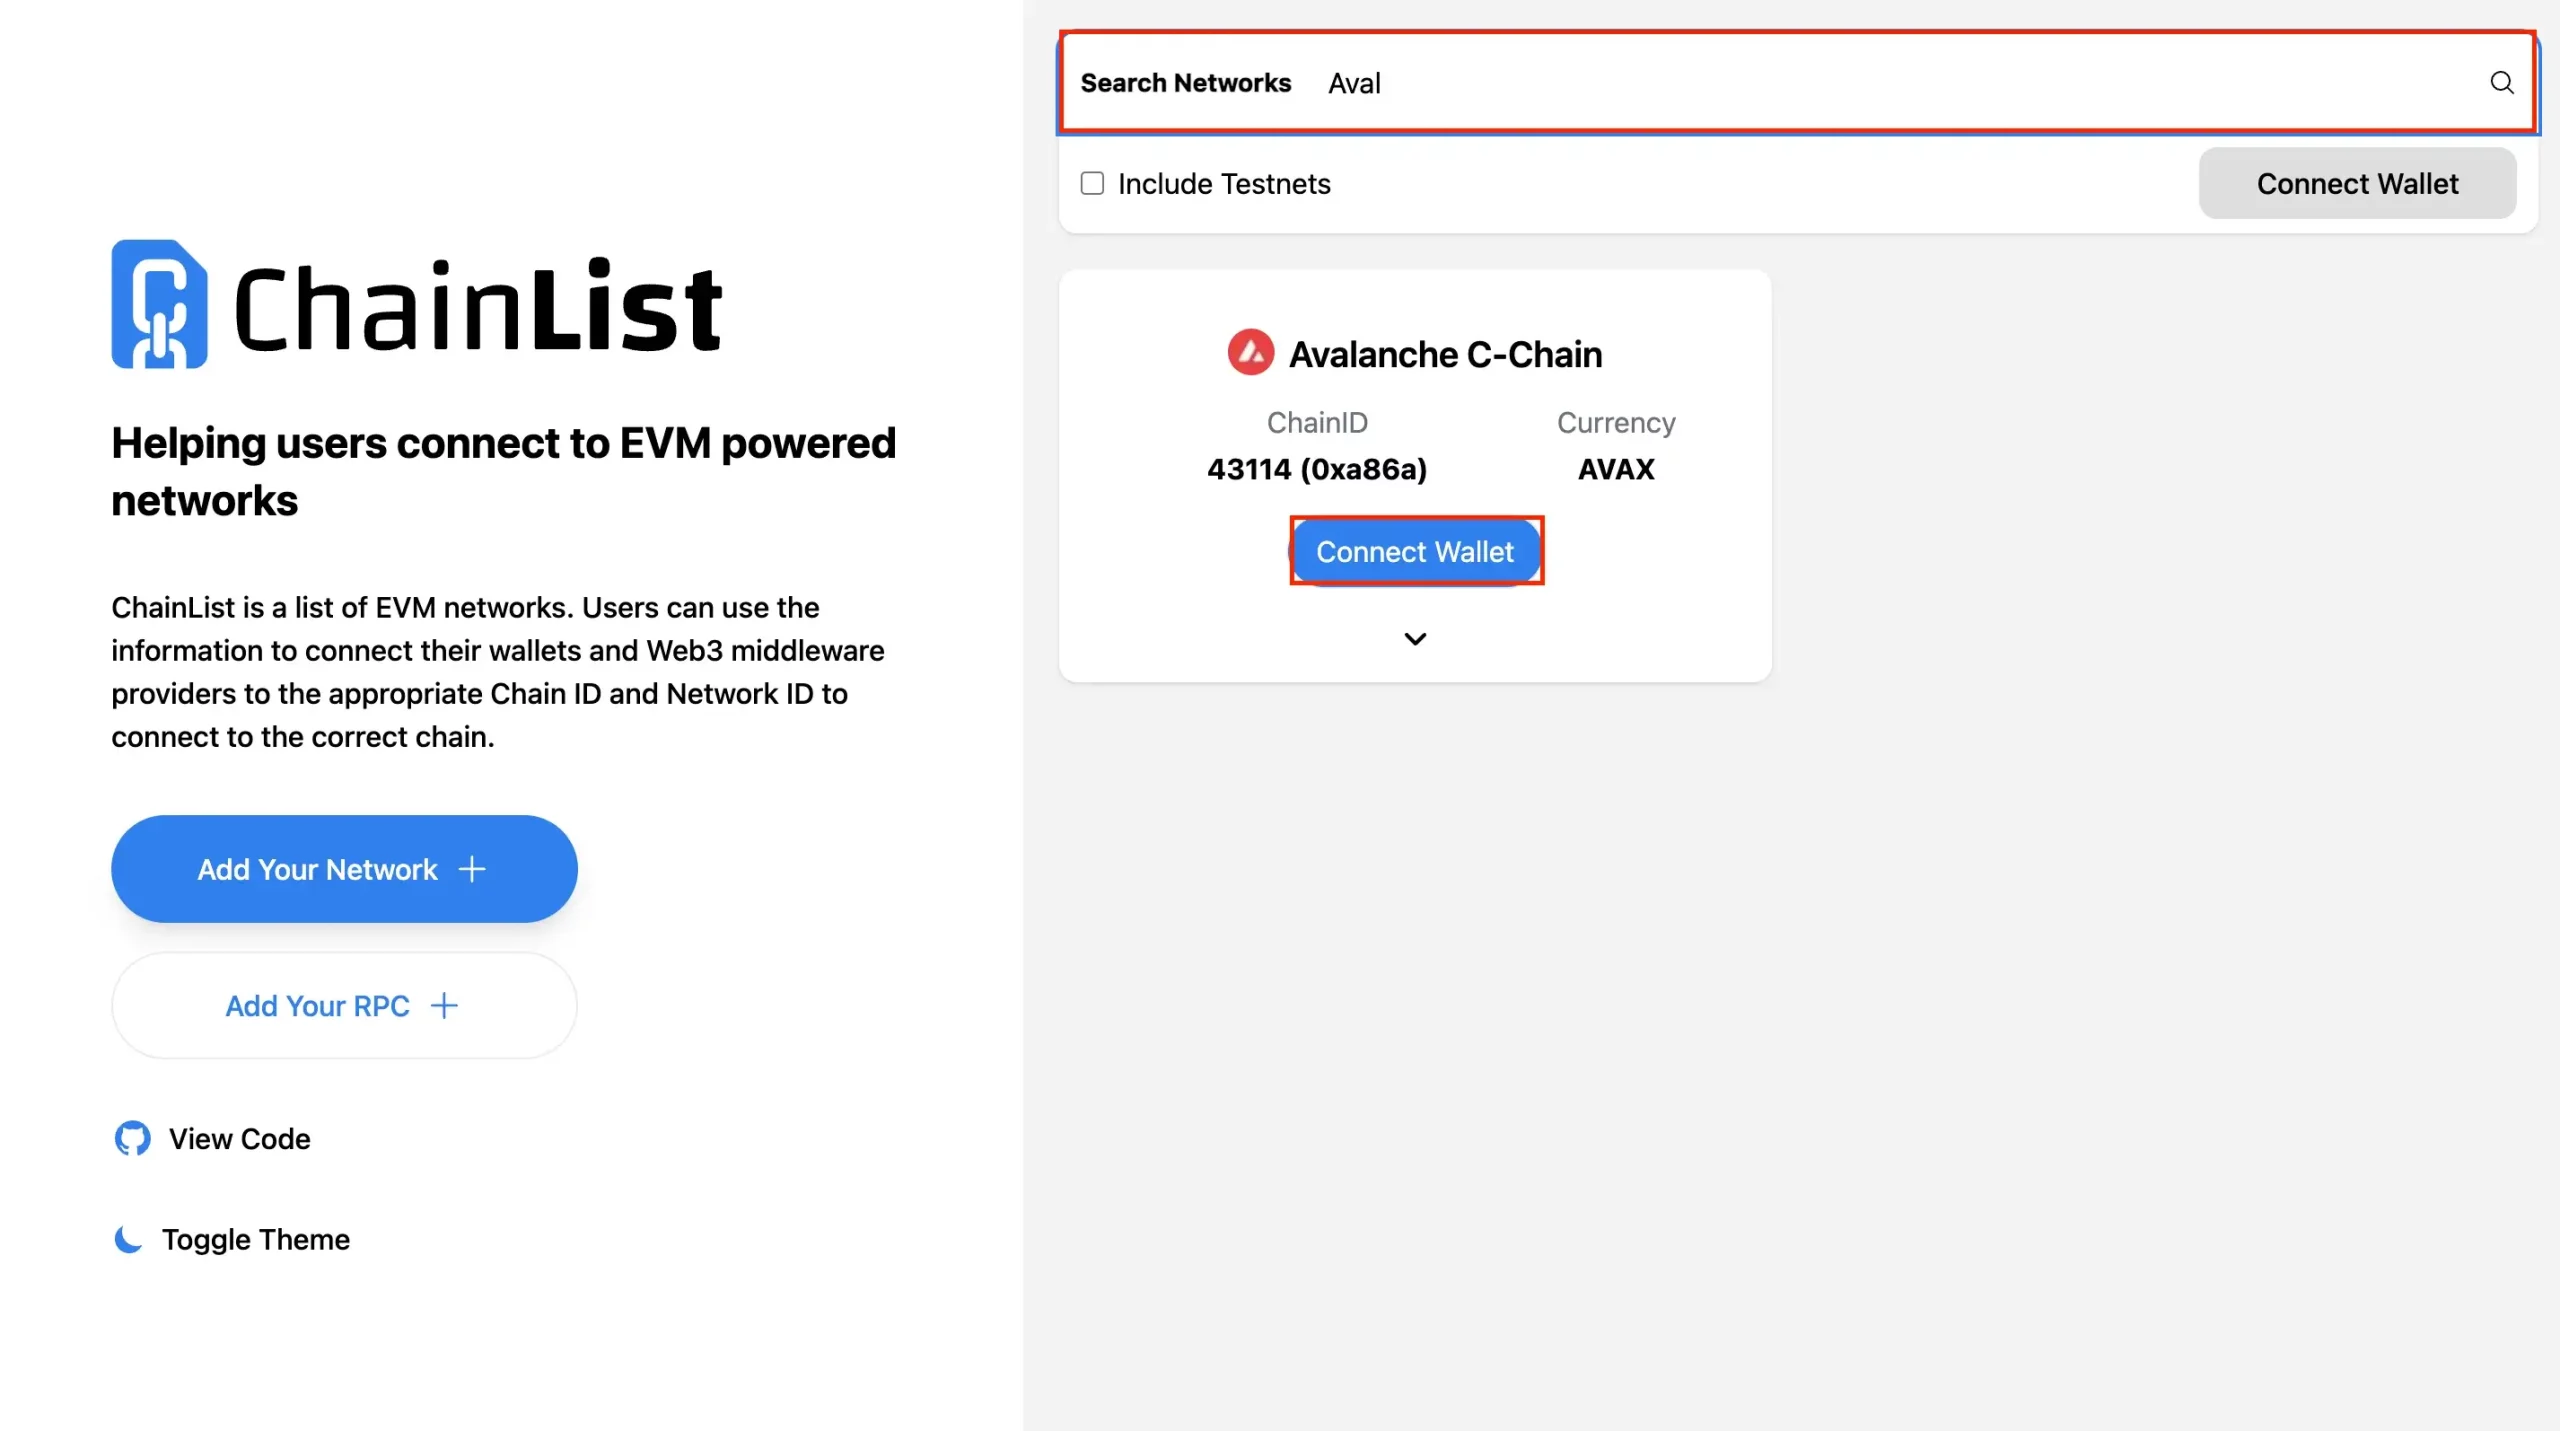 Step 1. Search for Avalanche Mainnet C-Chain and Press the "Connect Wallet" Button